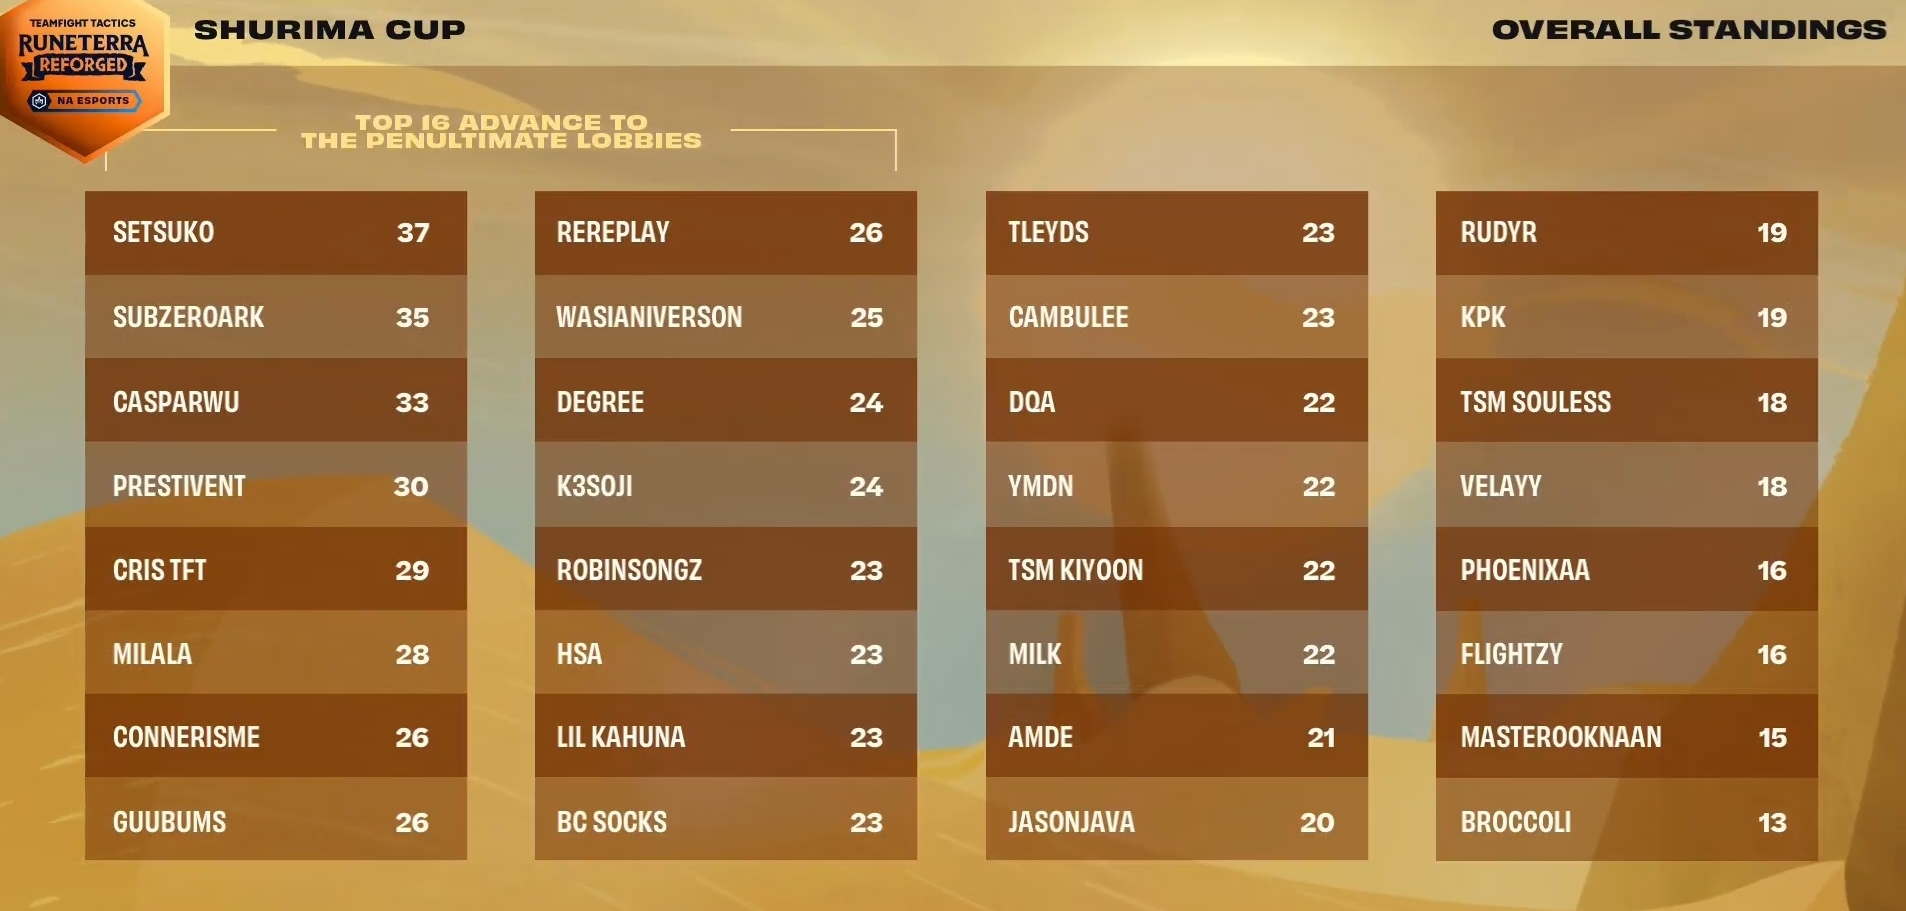 Image of Shurima Cup Top 16 cut standings